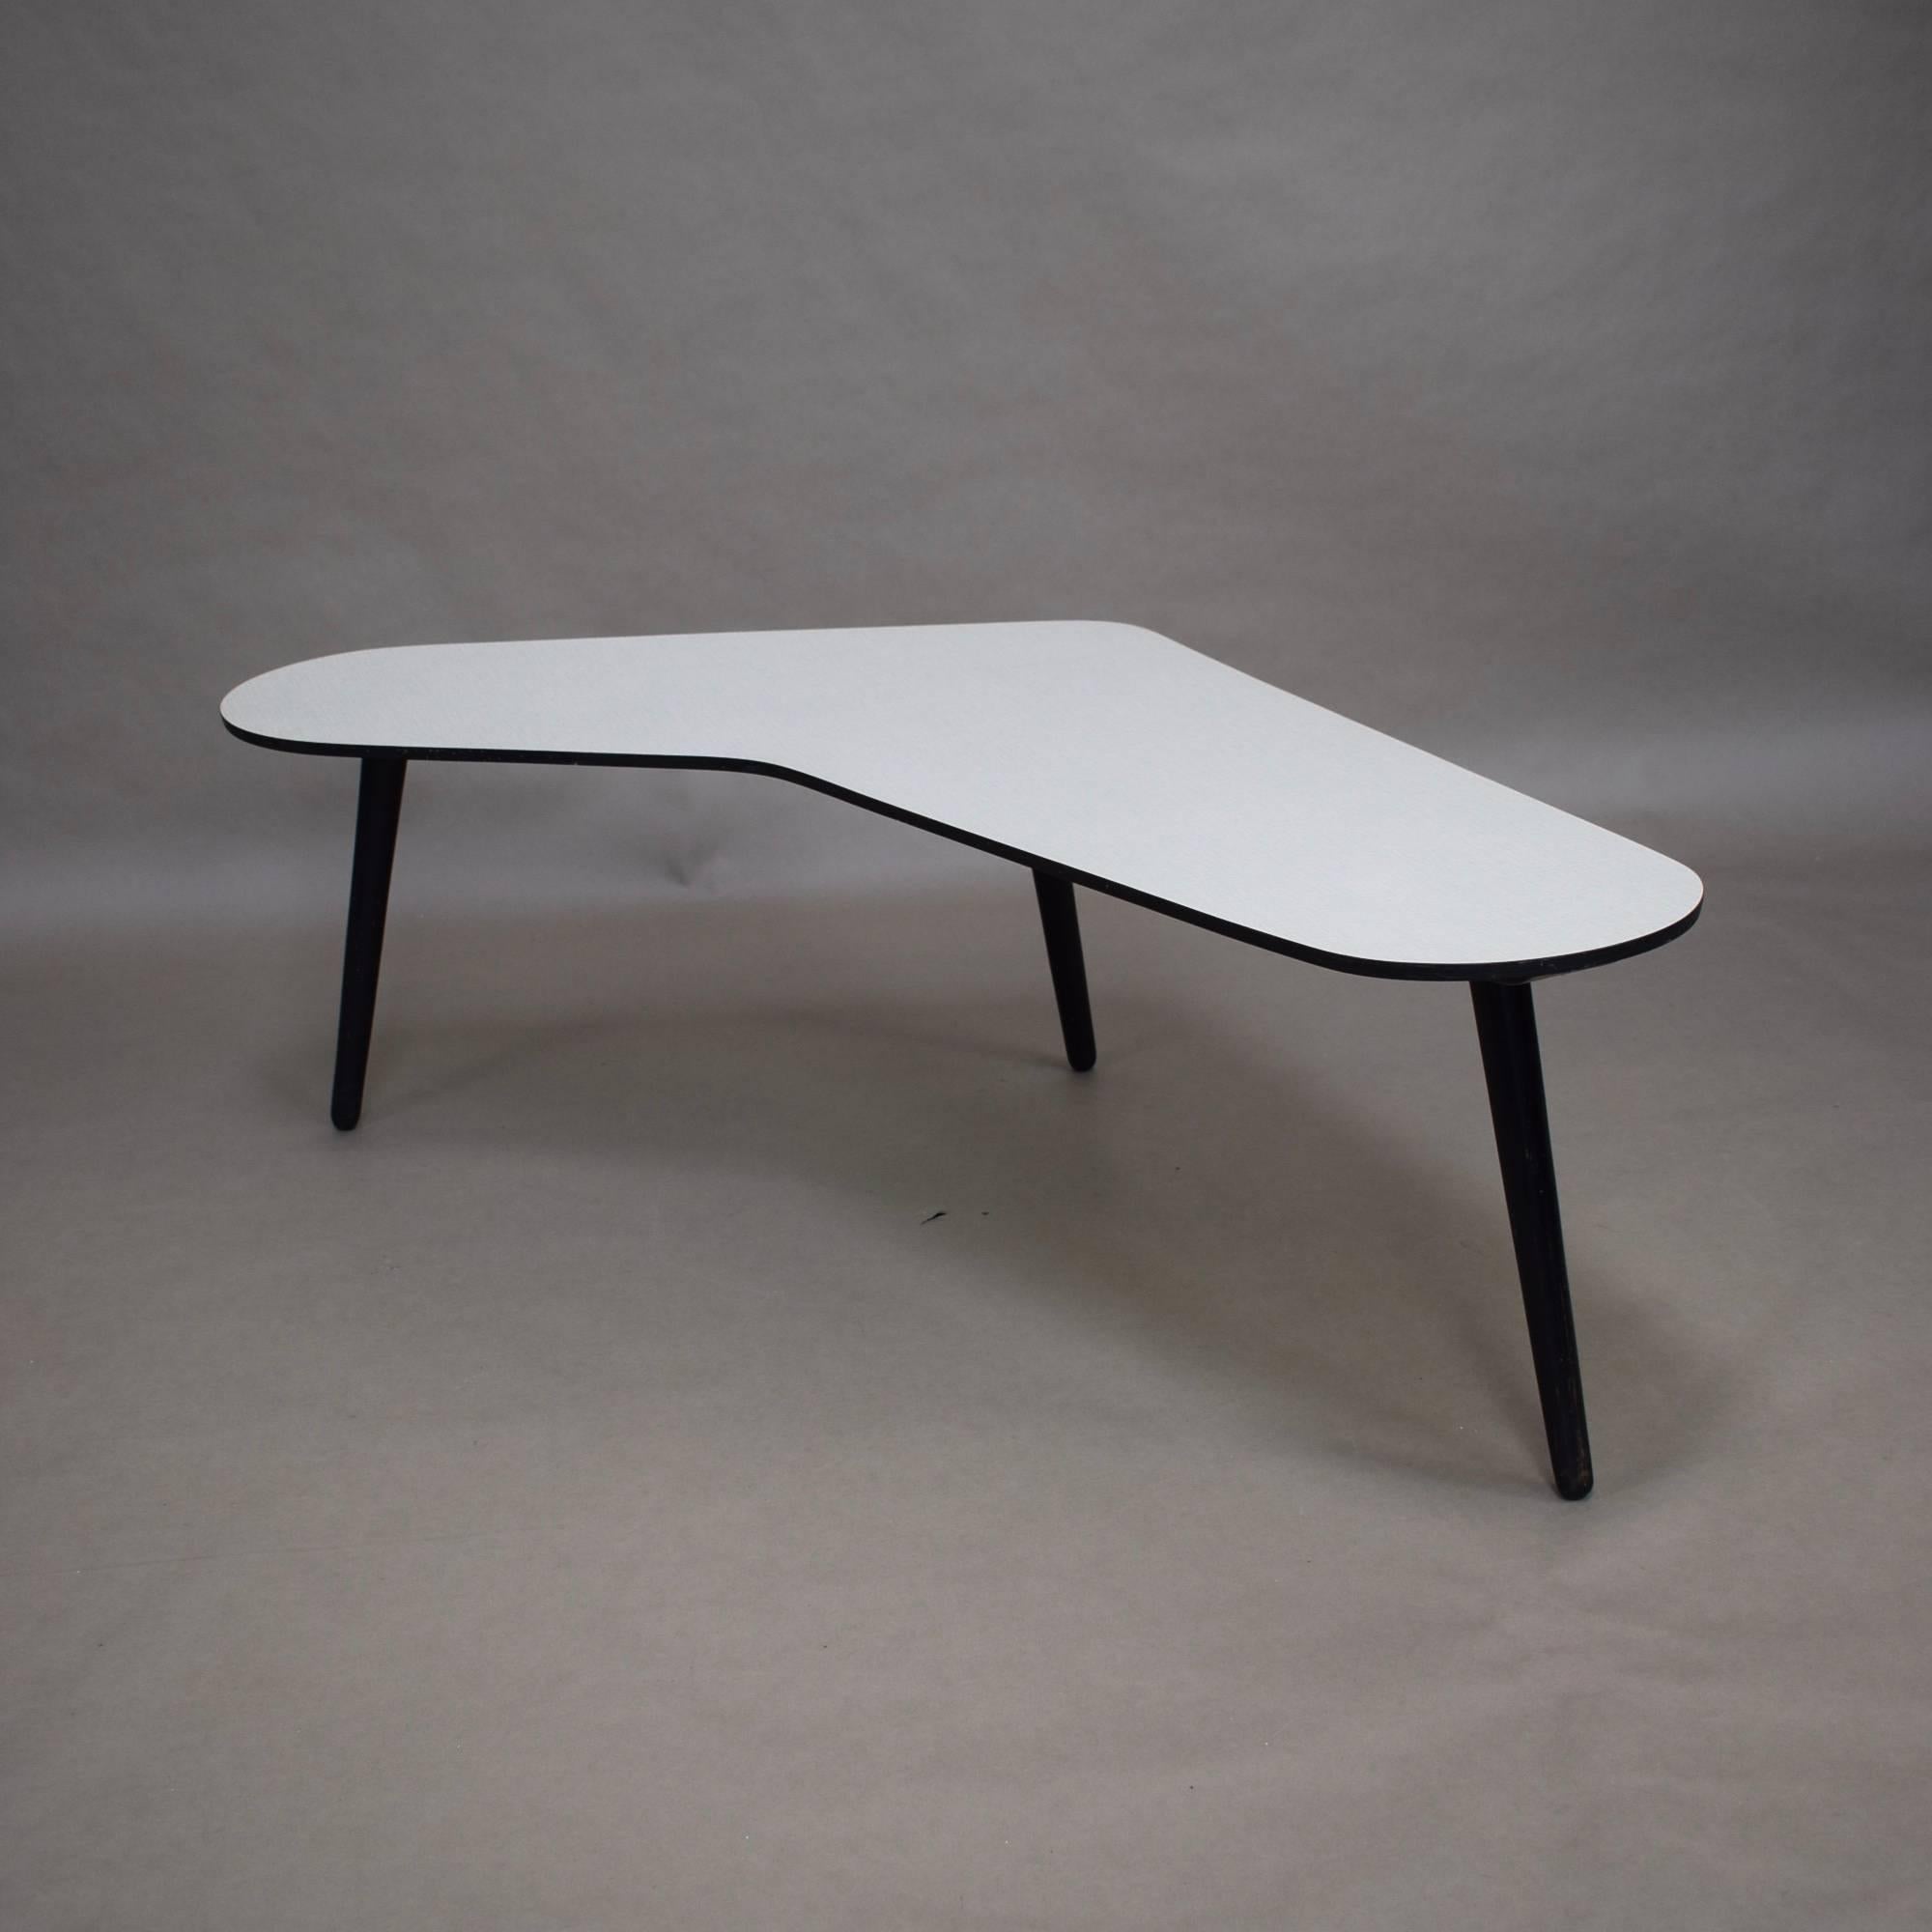 Manufacturer: Bovenkamp

Designer: unknown

Country: Netherlands

Model: Coffee table

Material: Black lacquered wood / Formica

Design period: 1950s.

Date of manufacturing: 1950s.

Size width: 145 x 84 x 42 cm.

Condition: Good /